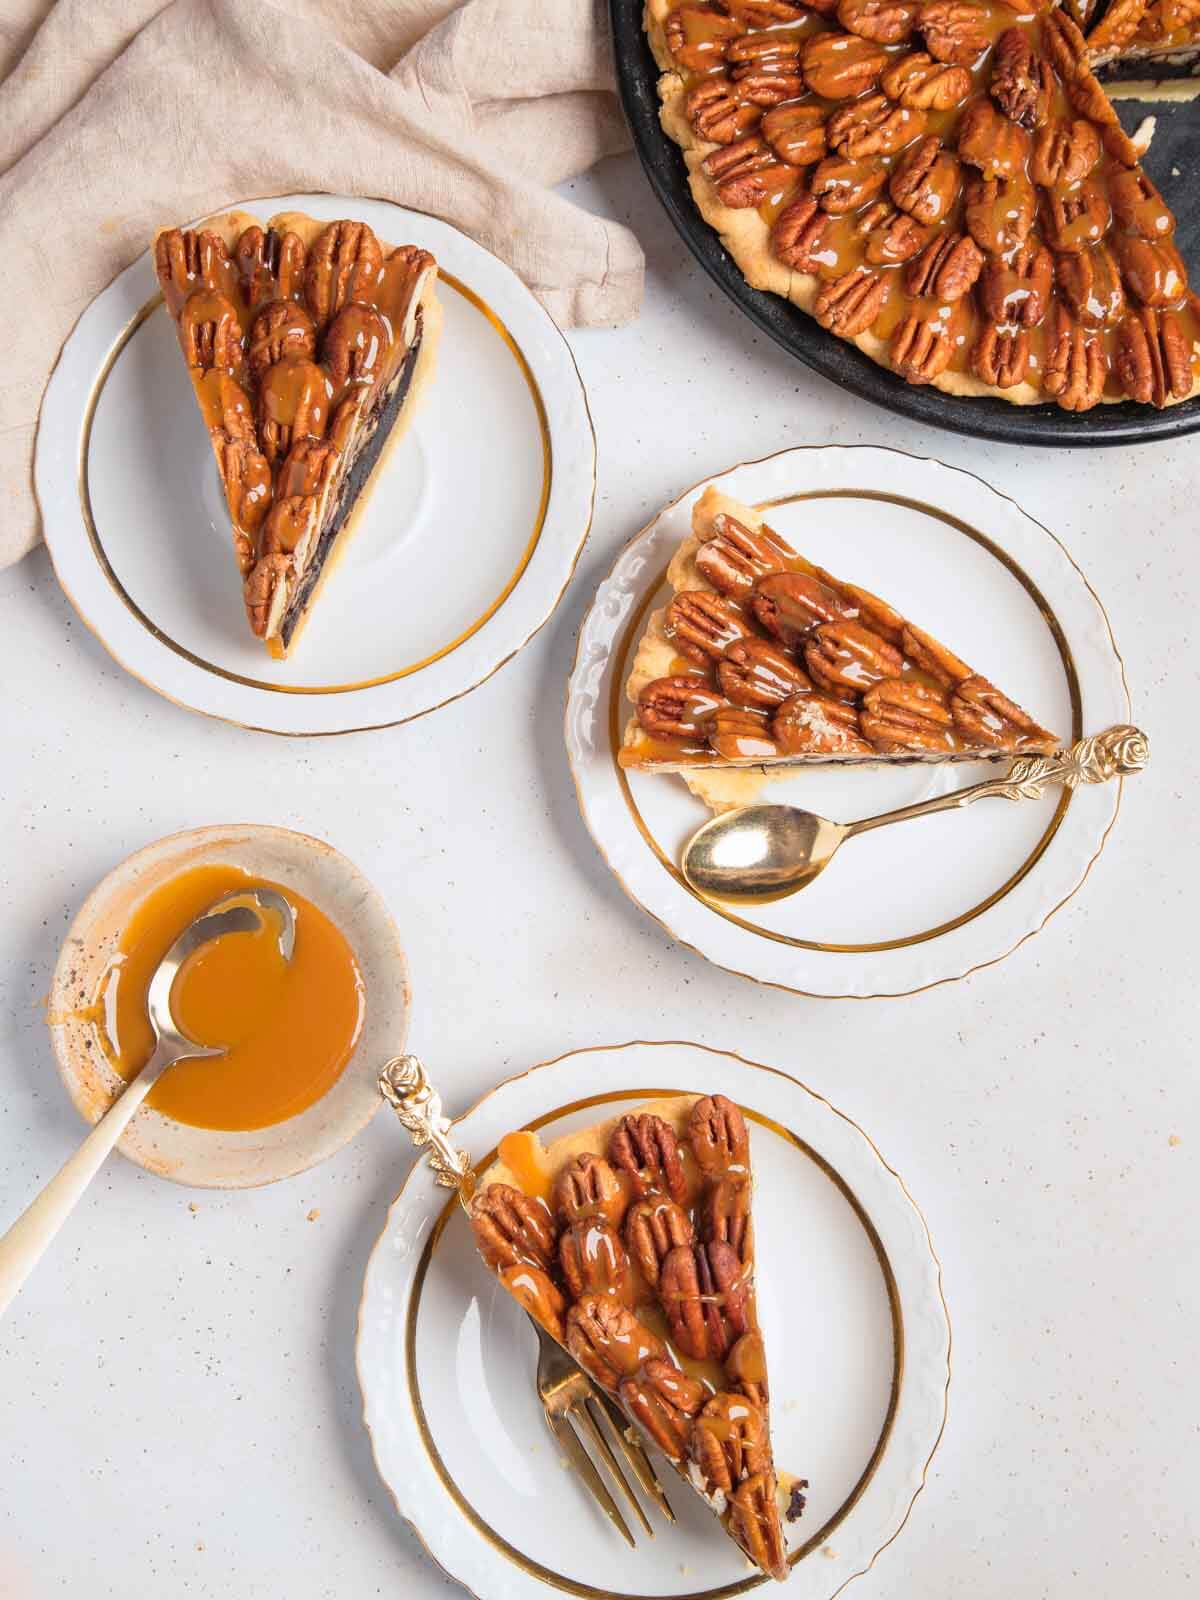 Three slices of chocolate pecan pie on a white background.